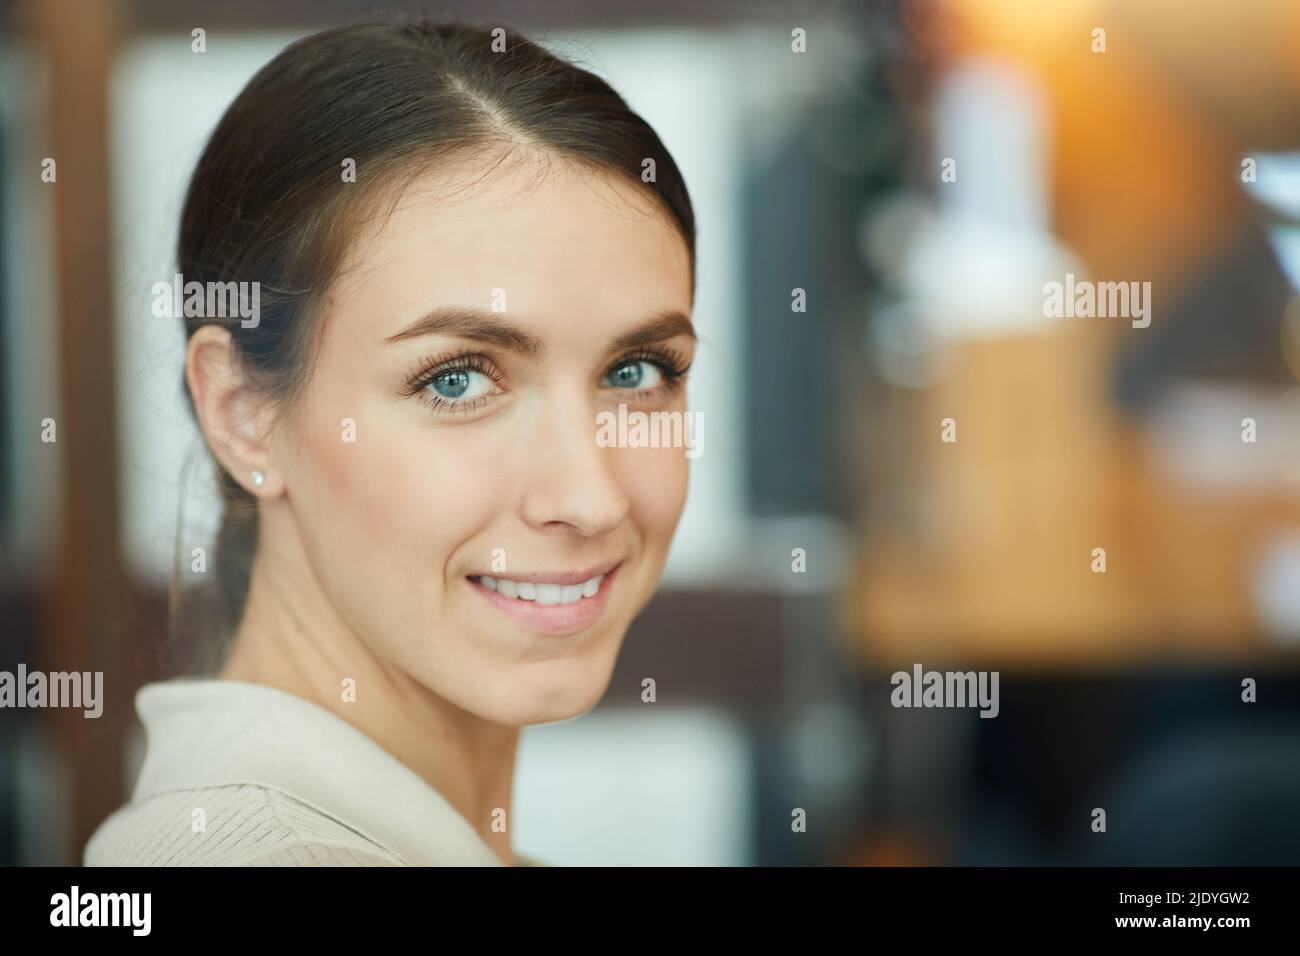 Portrait of positive confident girl with blue eyes smiling at camera while standing in modern cafe Stock Photo